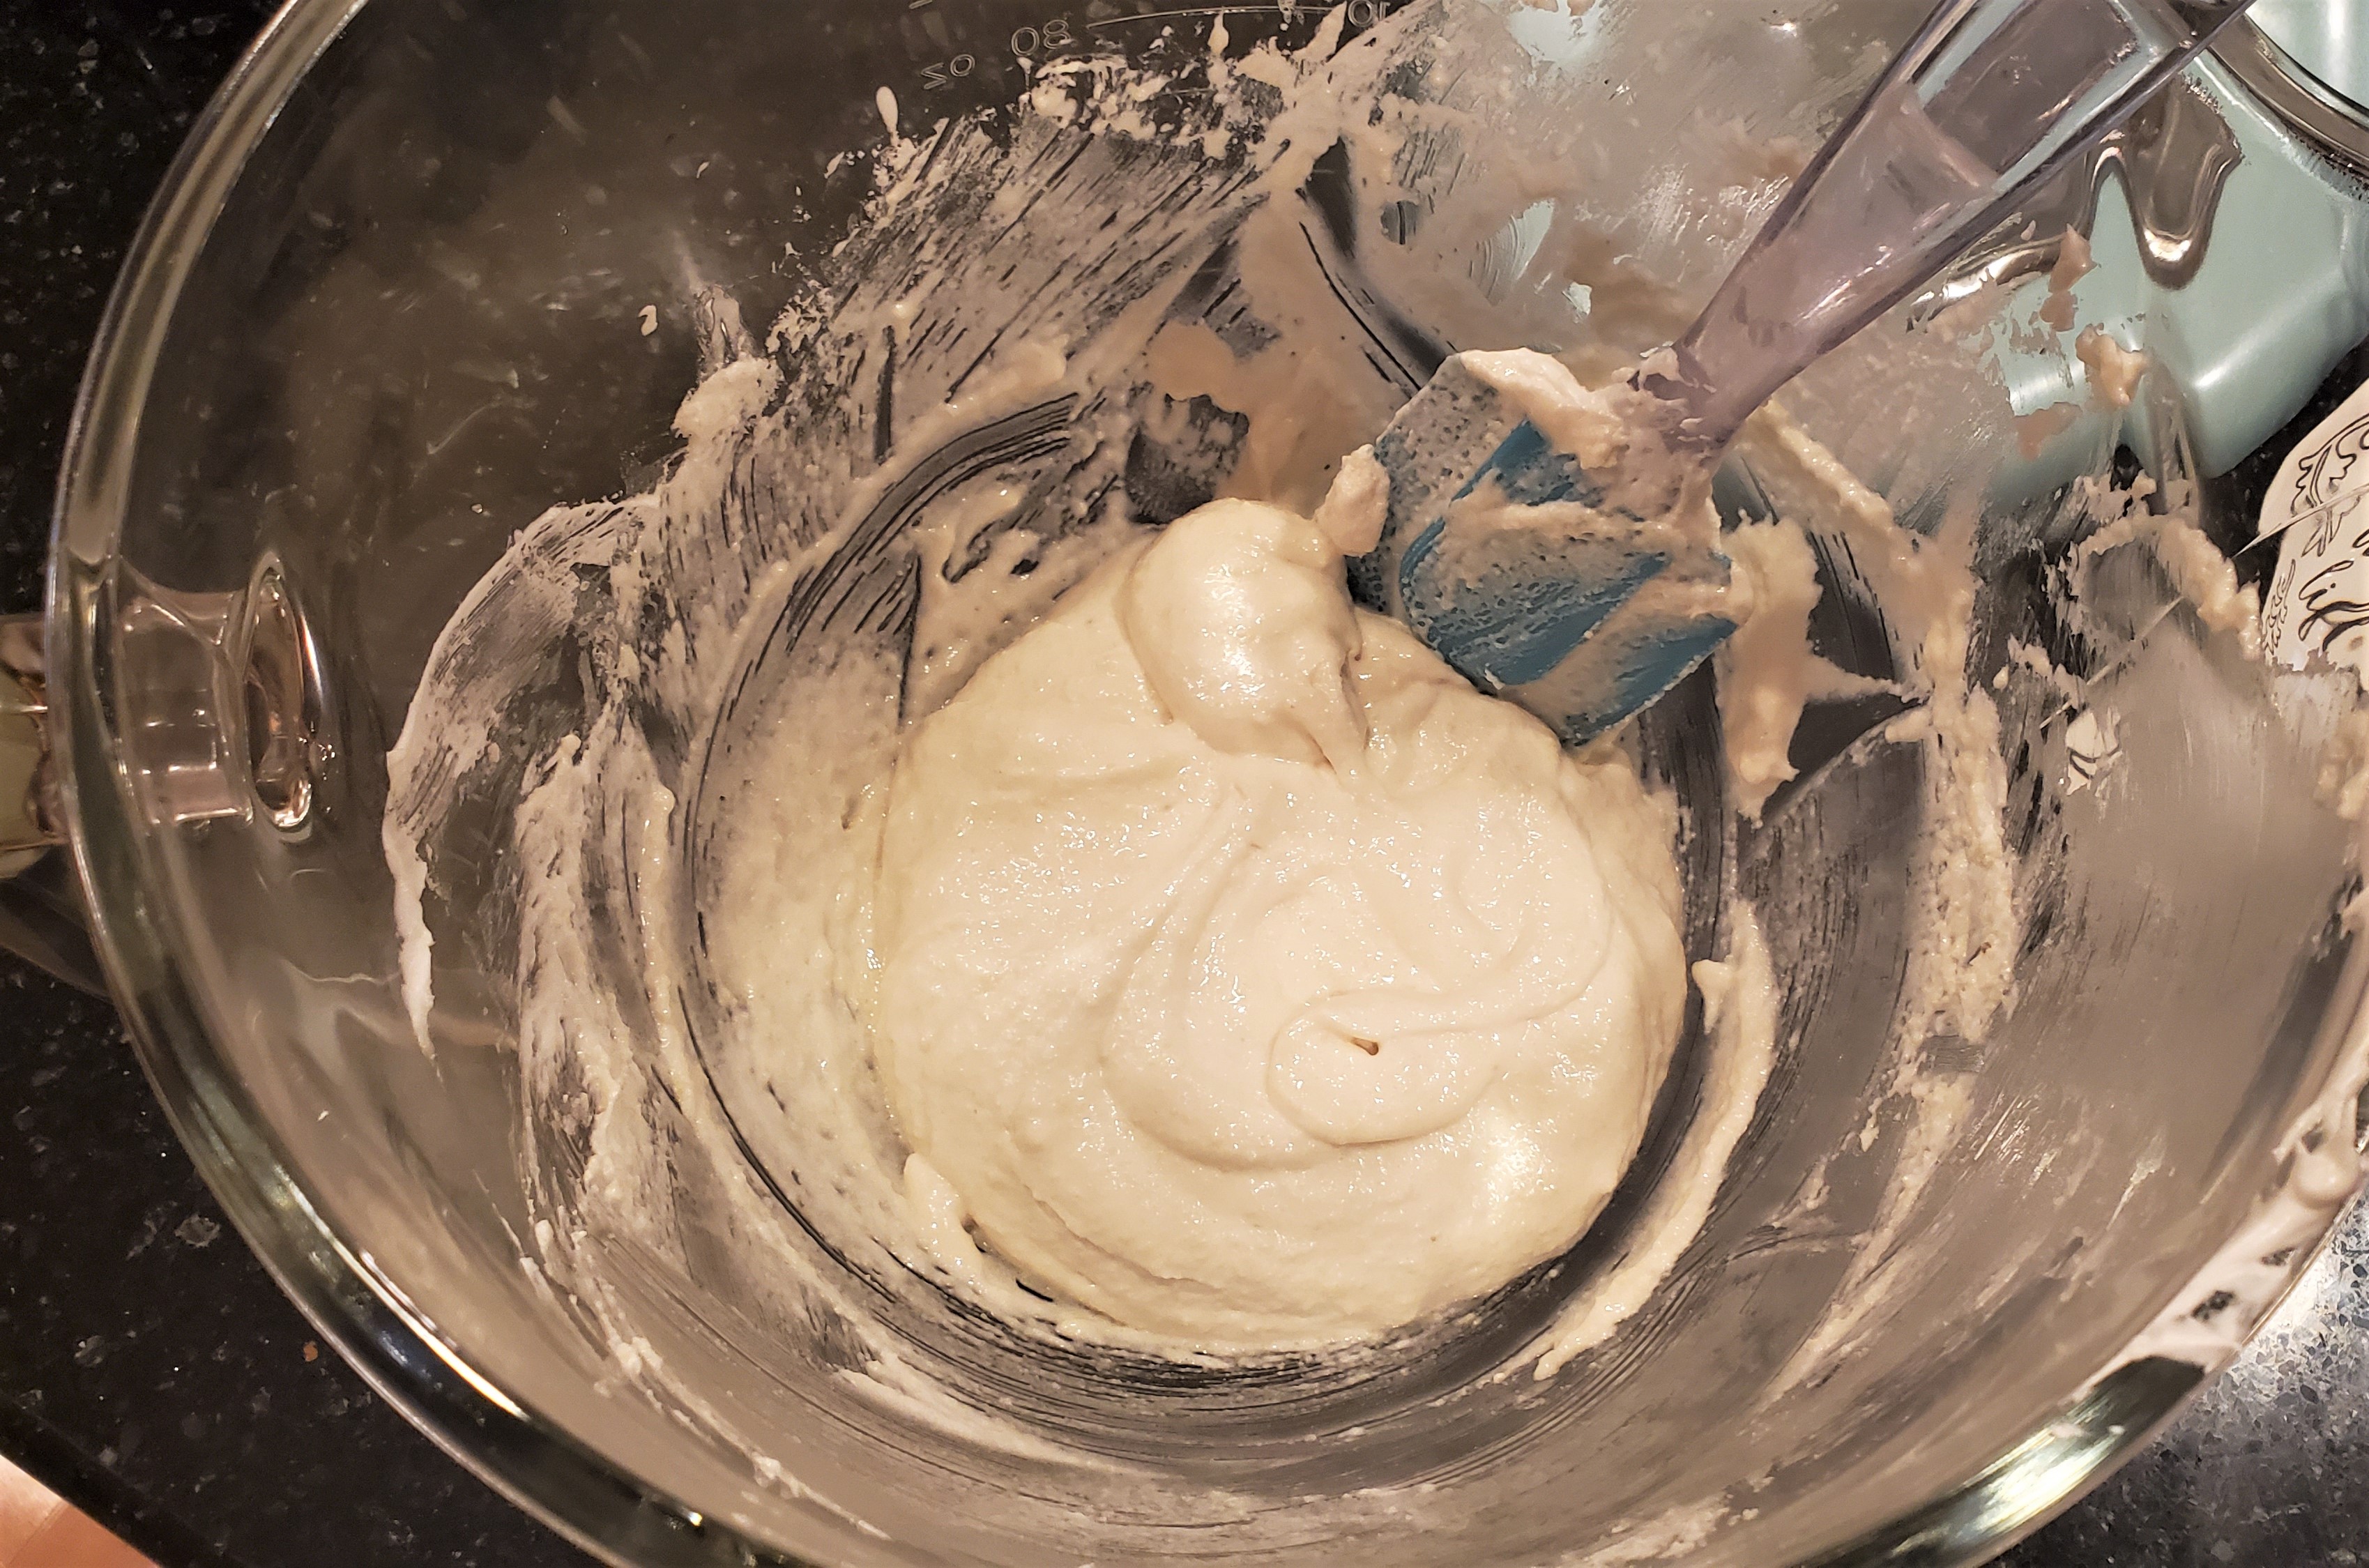 The inside of a bowl that shows the ideal consistency for your macaron batter. Sift, yet runny.